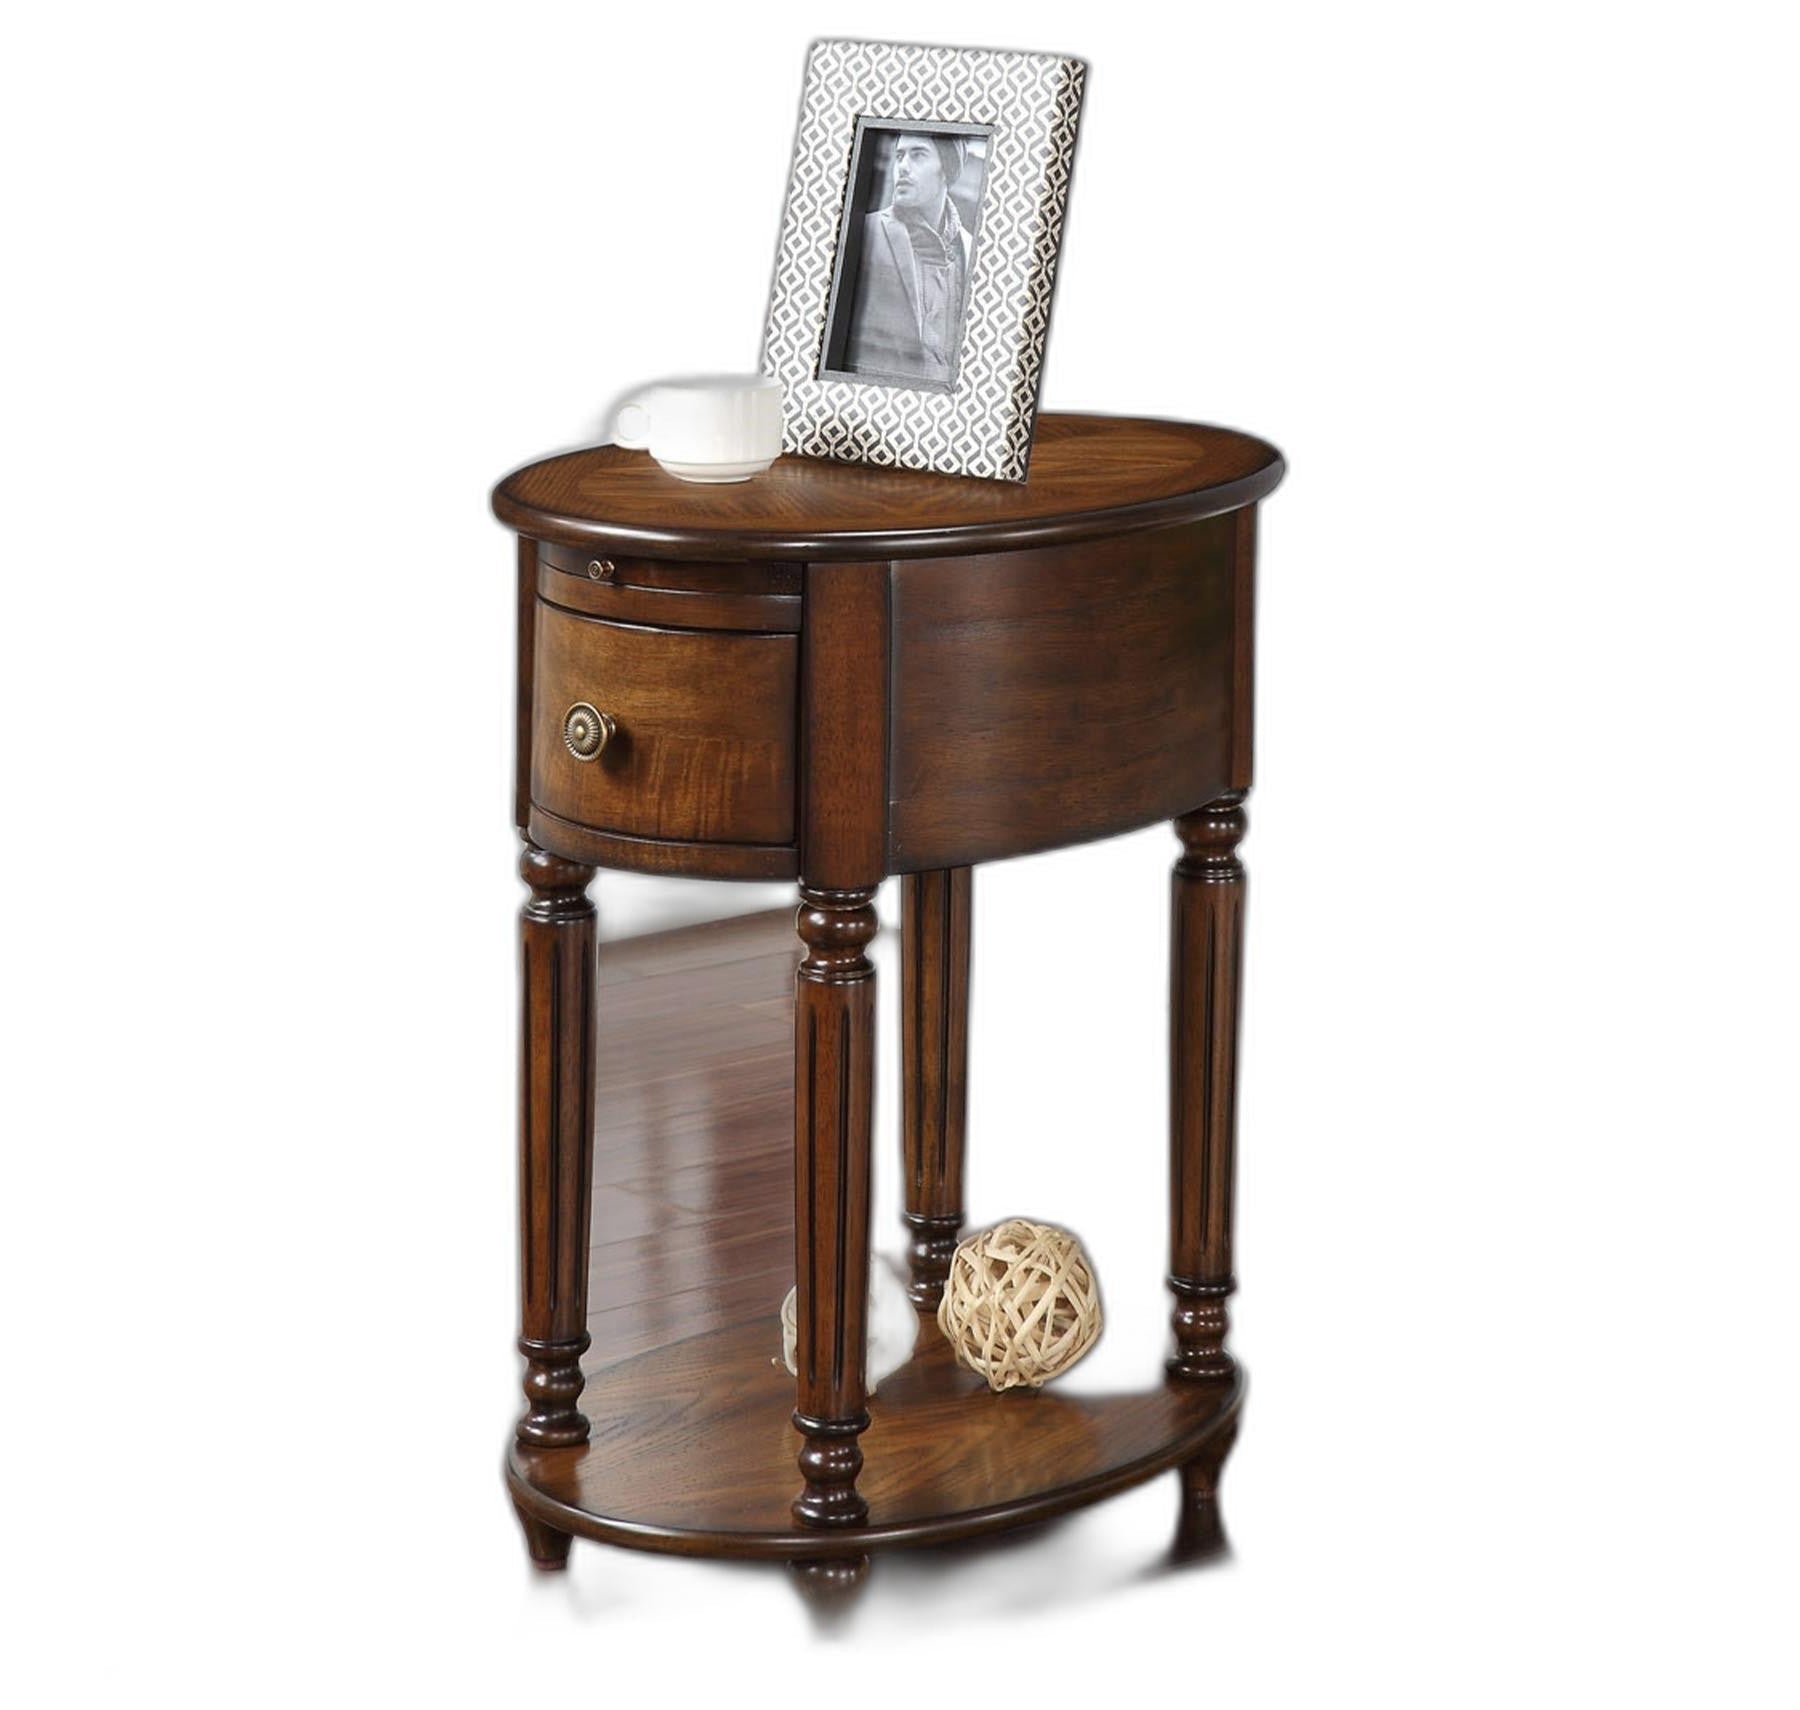 HomeRoots Antiqued Oval Wooden End Table in Burnished Walnut Finish